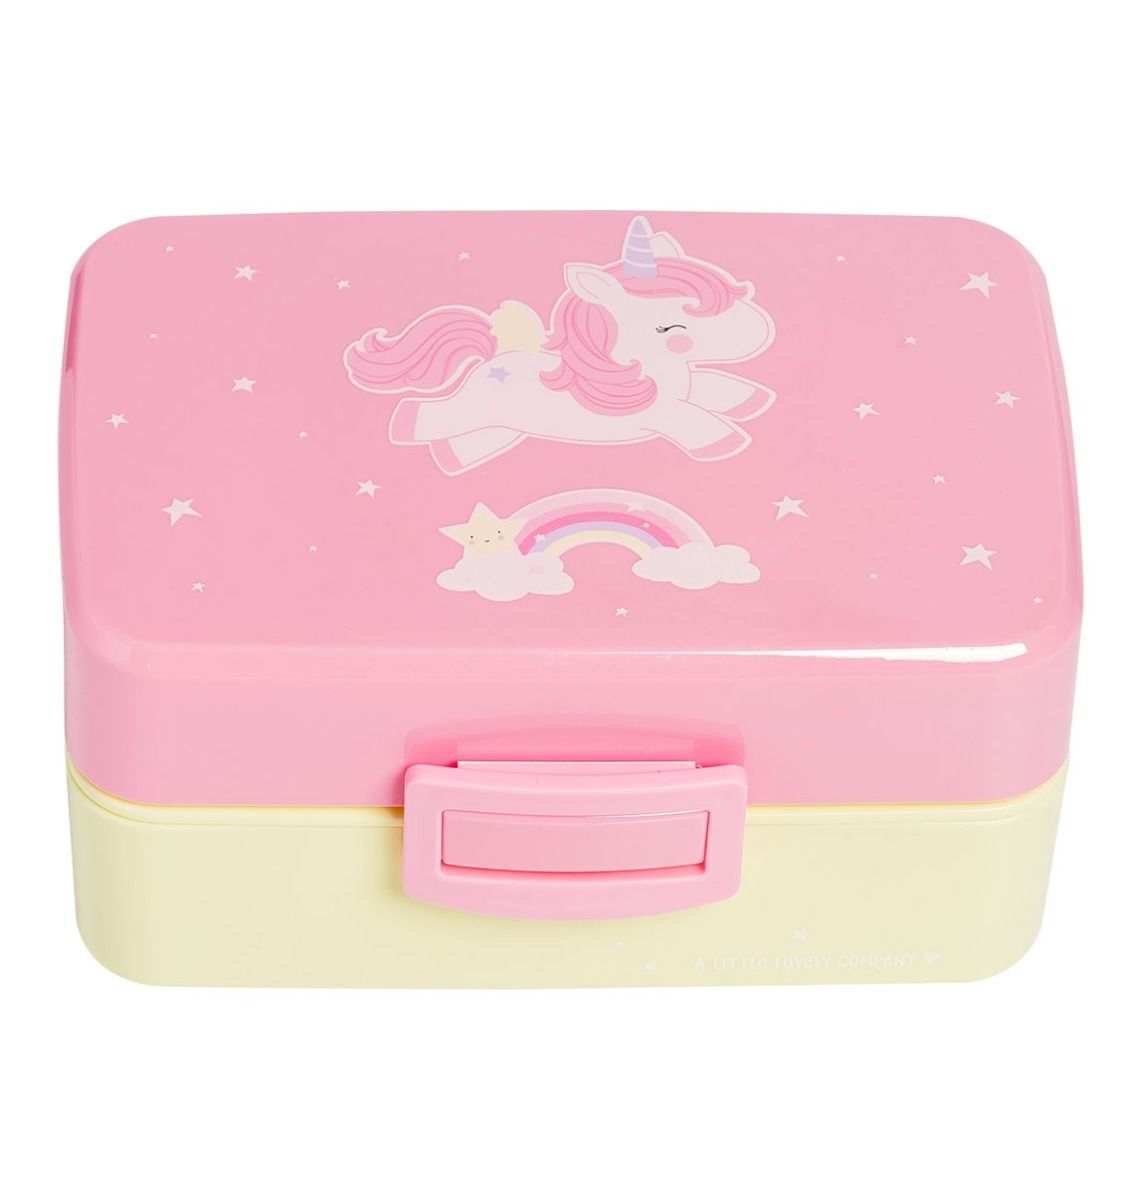 Lunch Box Unicorn by A Little Lovely Company